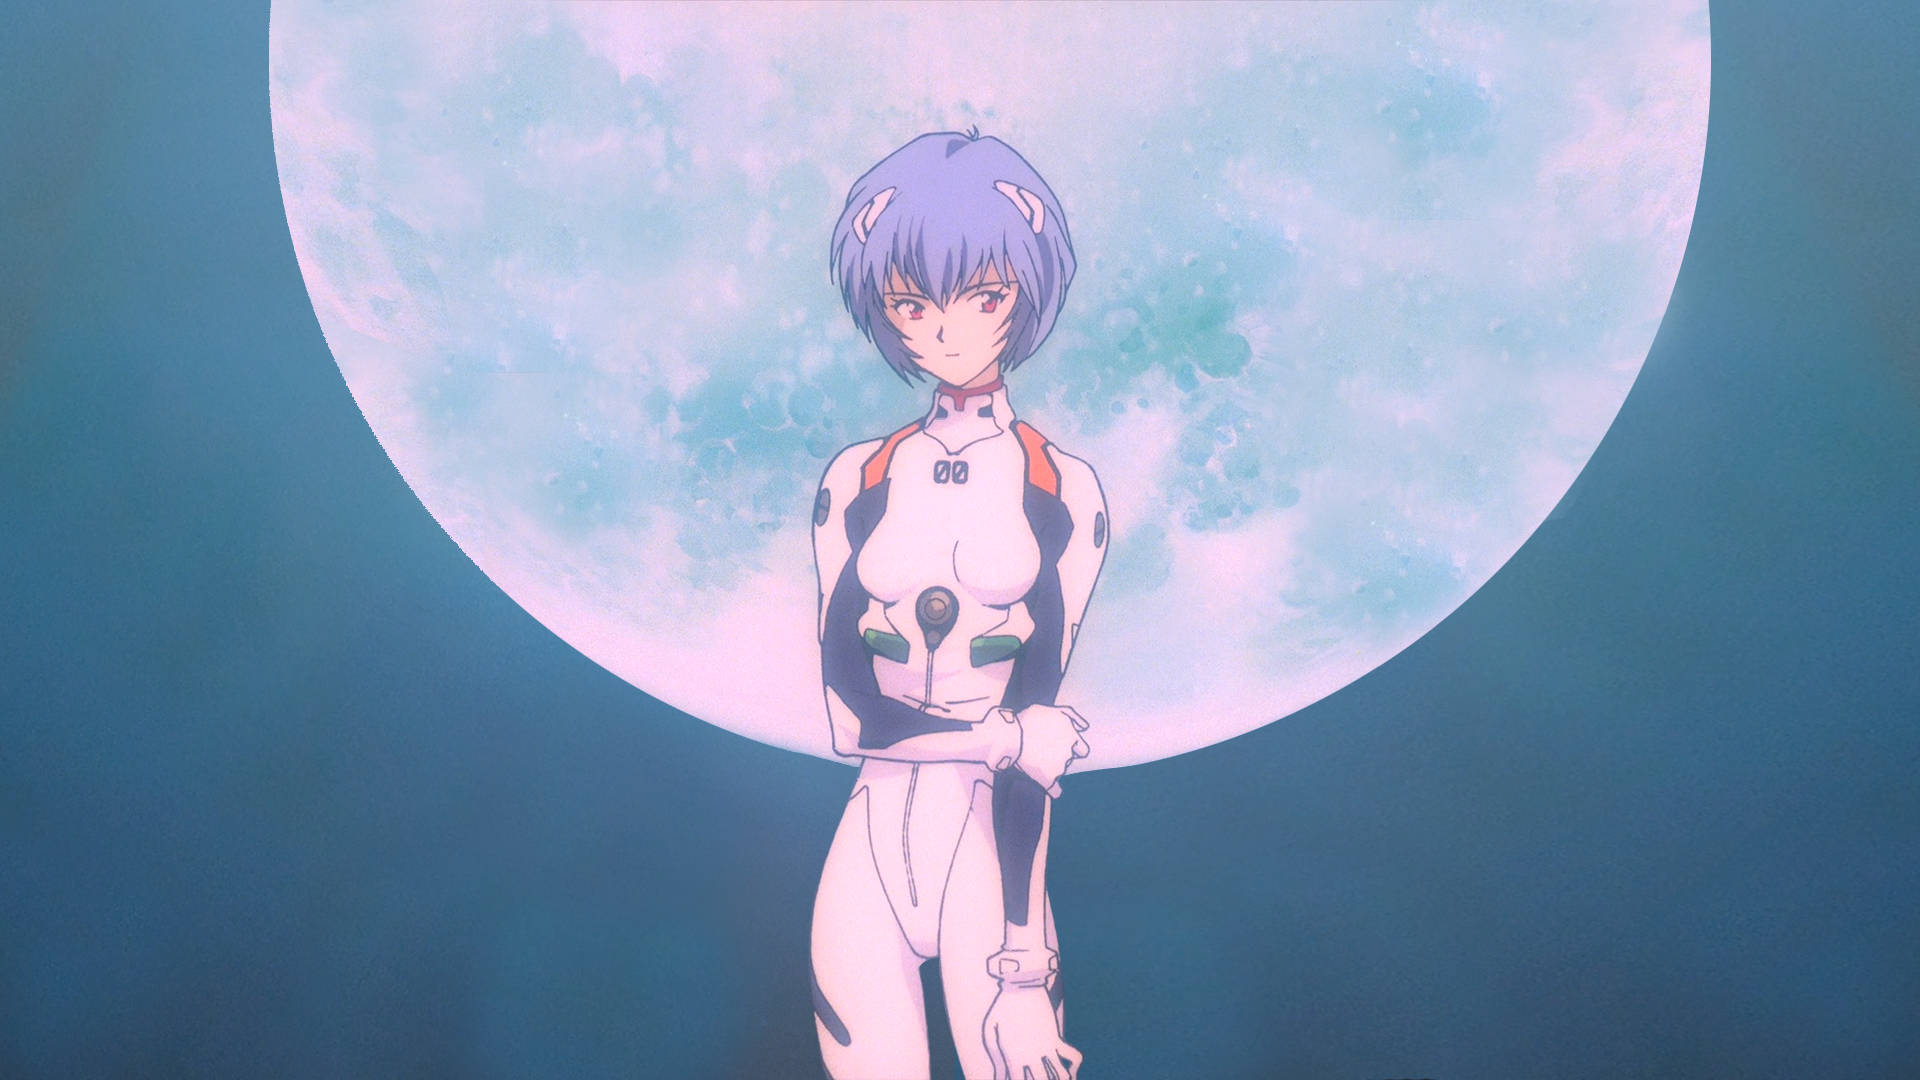 A Girl In An Anime Outfit Standing In Front Of A Moon Background